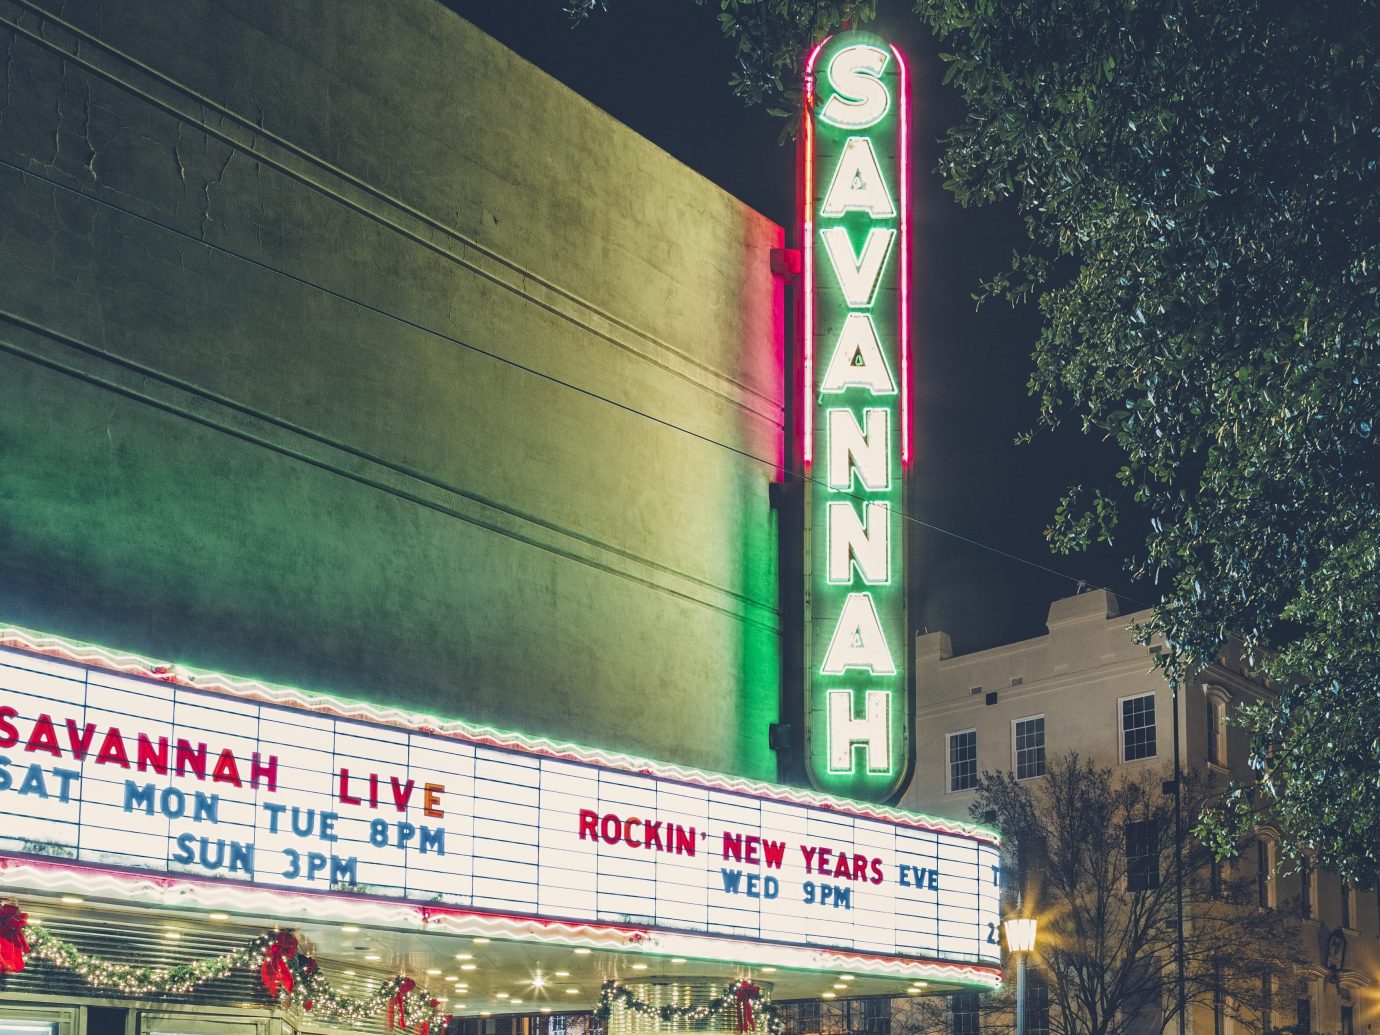 Savannah Theatre in the night after live show.